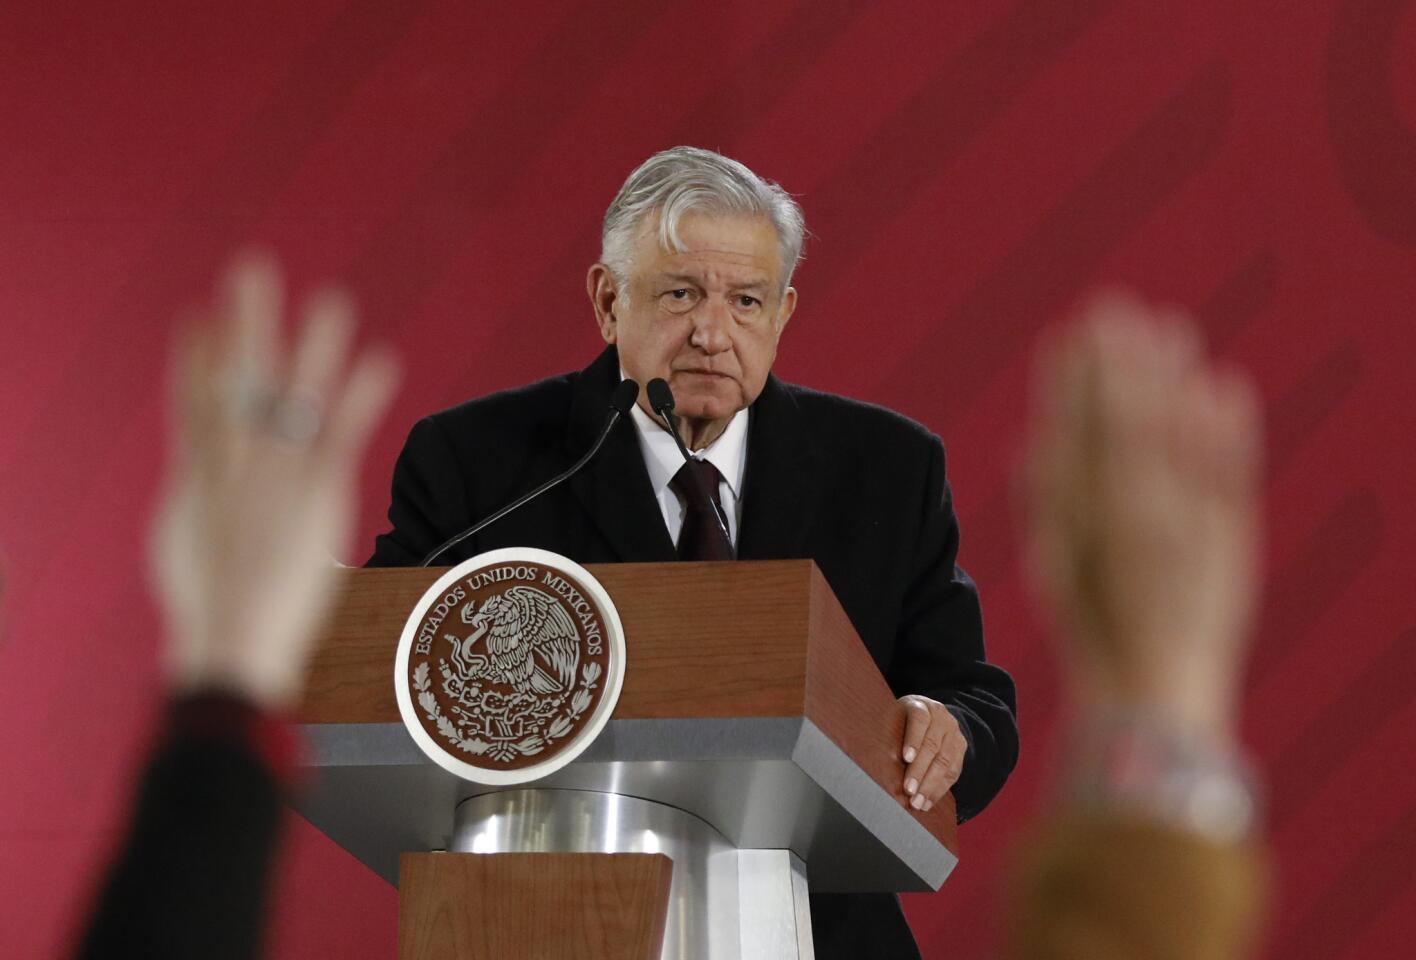 At a news conference Jan. 9, Mexican President Andres Manuel Lopez Obrador issued an emotional appeal to his countrymen to help battle against fuel thefts.